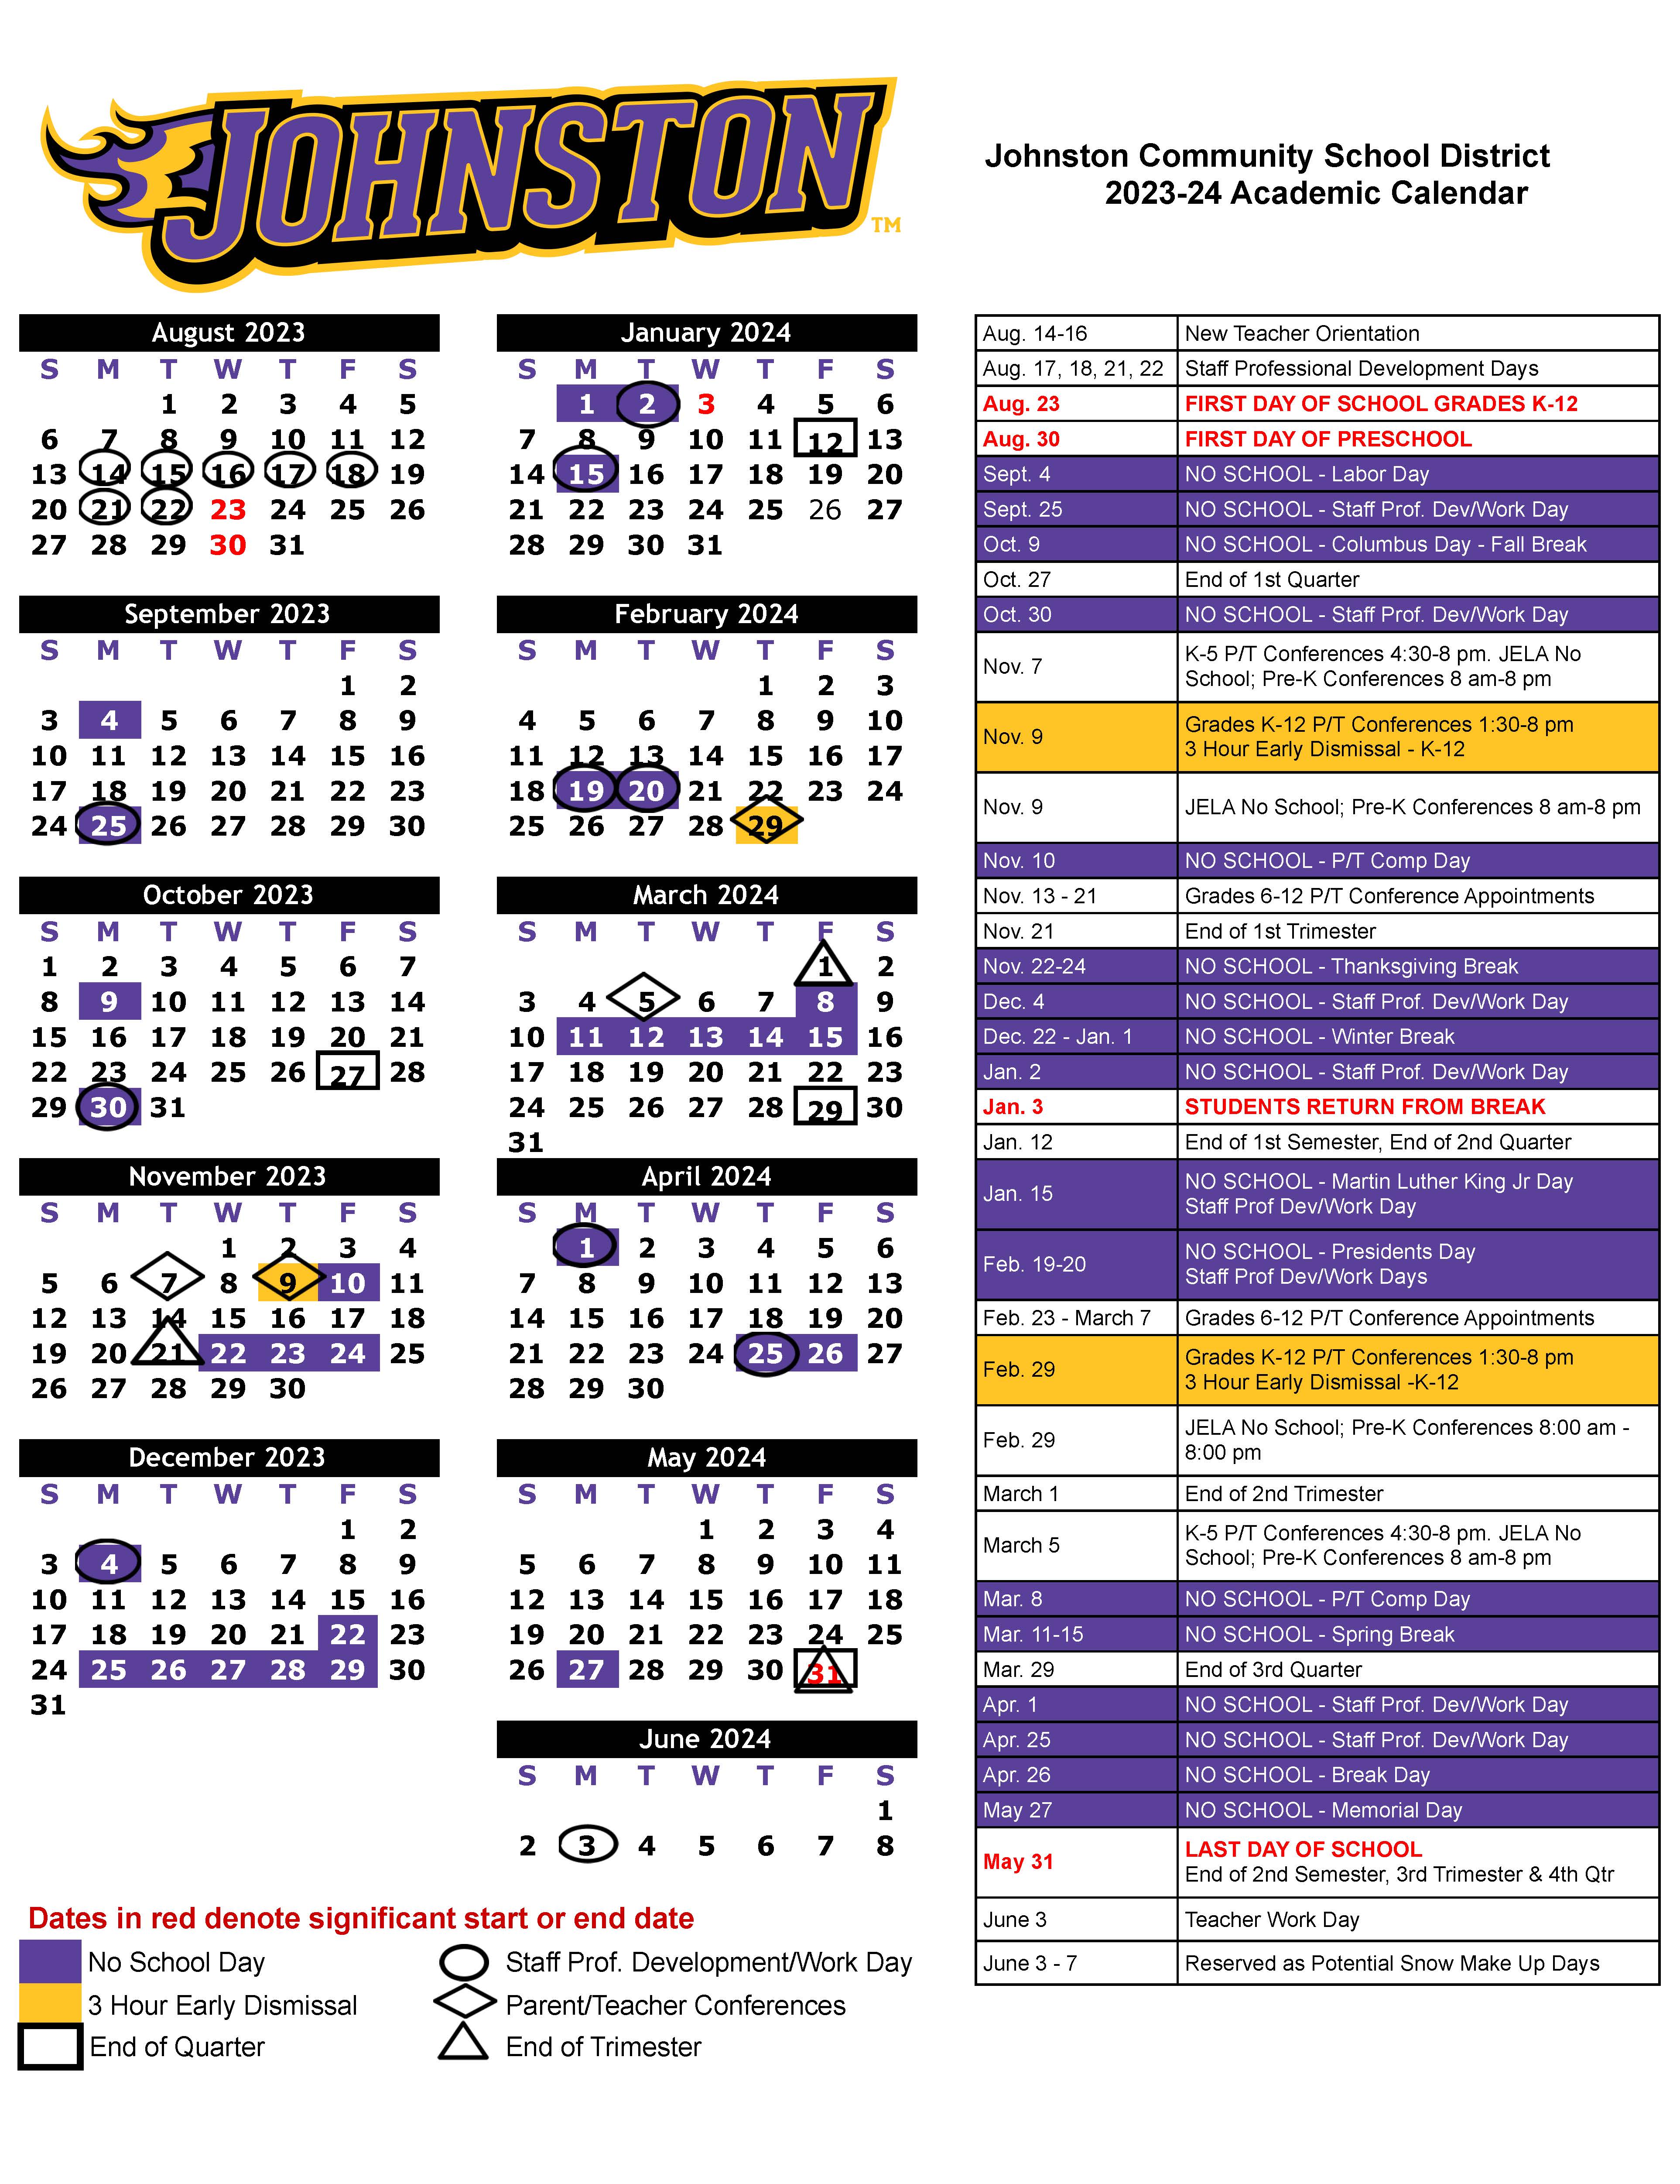 Academic Calendar approved for 202324 Johnston Community School District